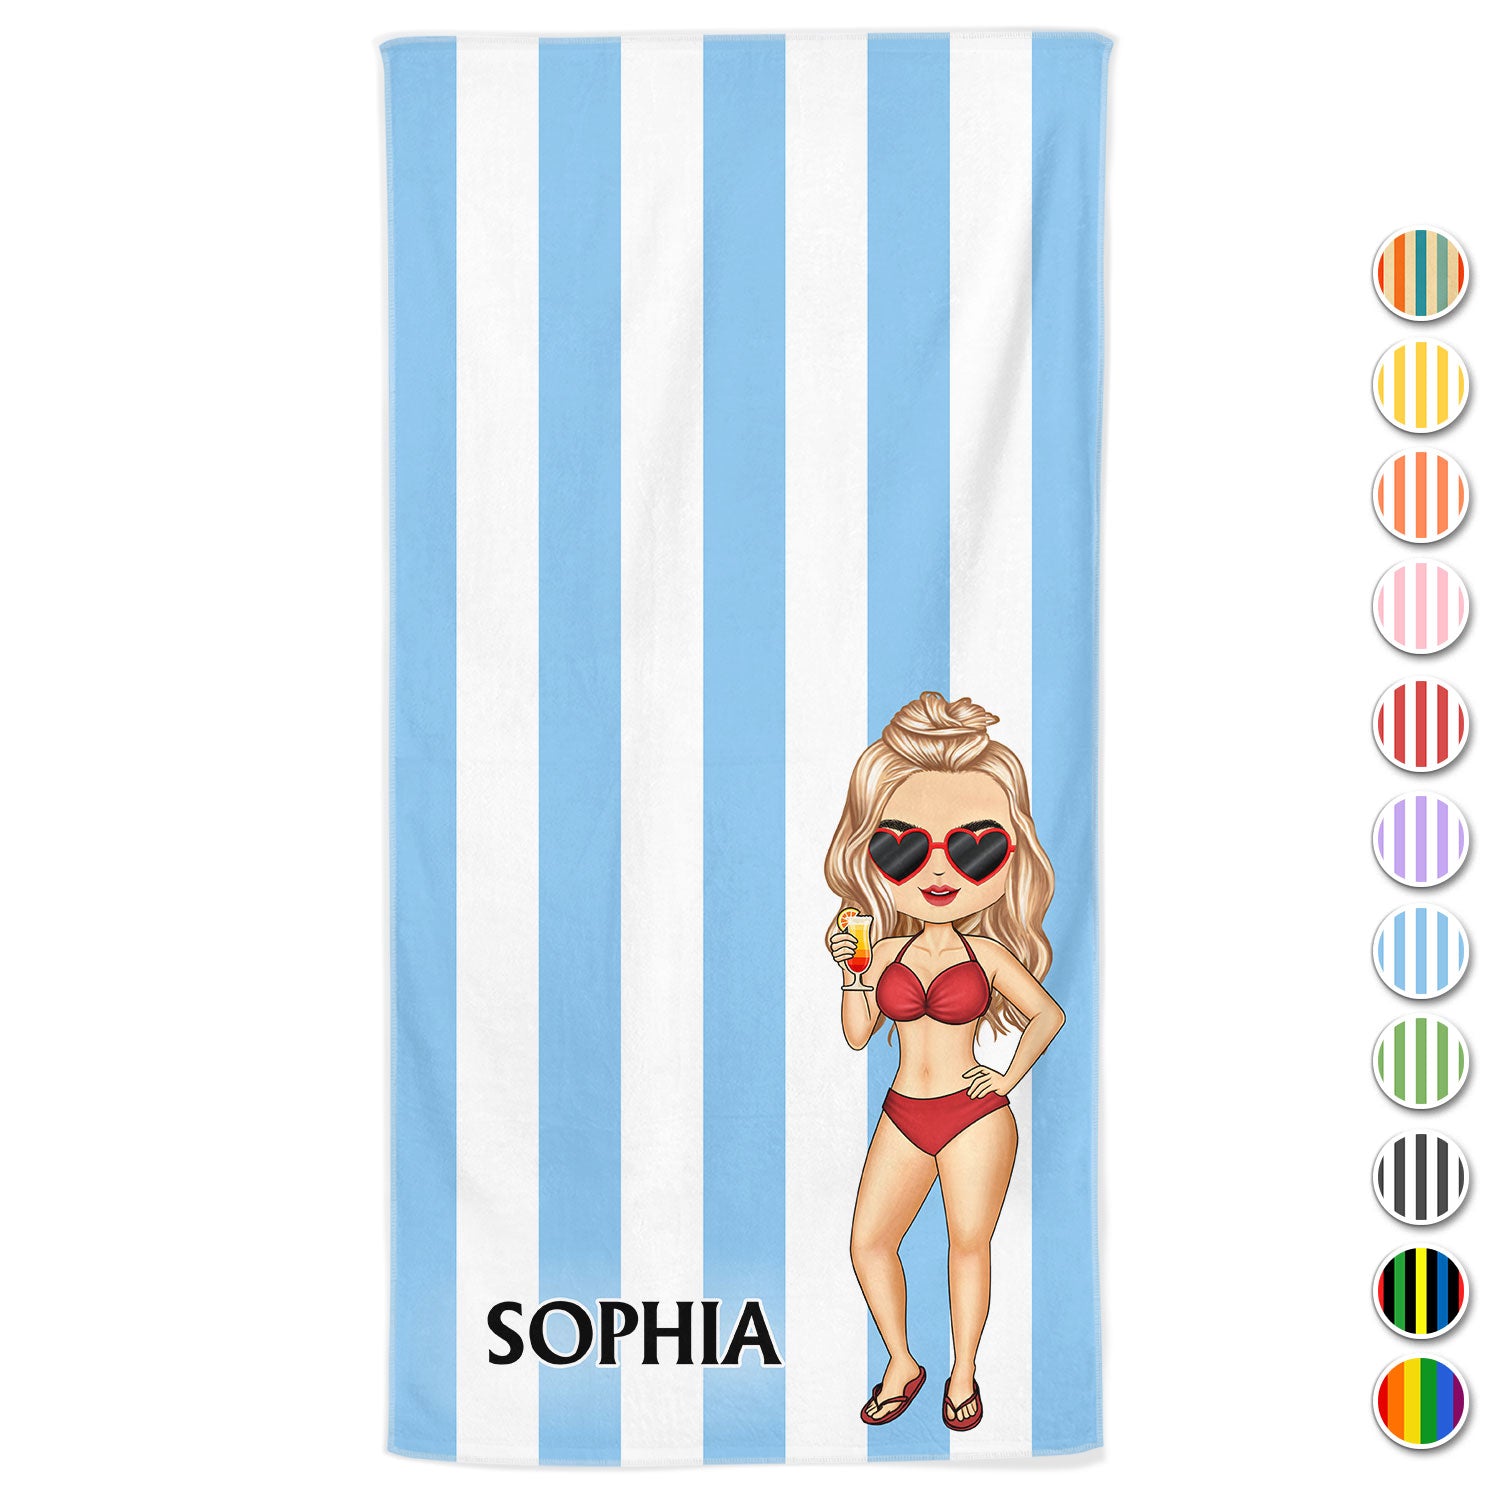 Chibi Traveling Beach Poolside Swimming Picnic Vacation Corner - Birthday, Funny Gift For Her, Him, Besties, Family - Personalized Beach Towel